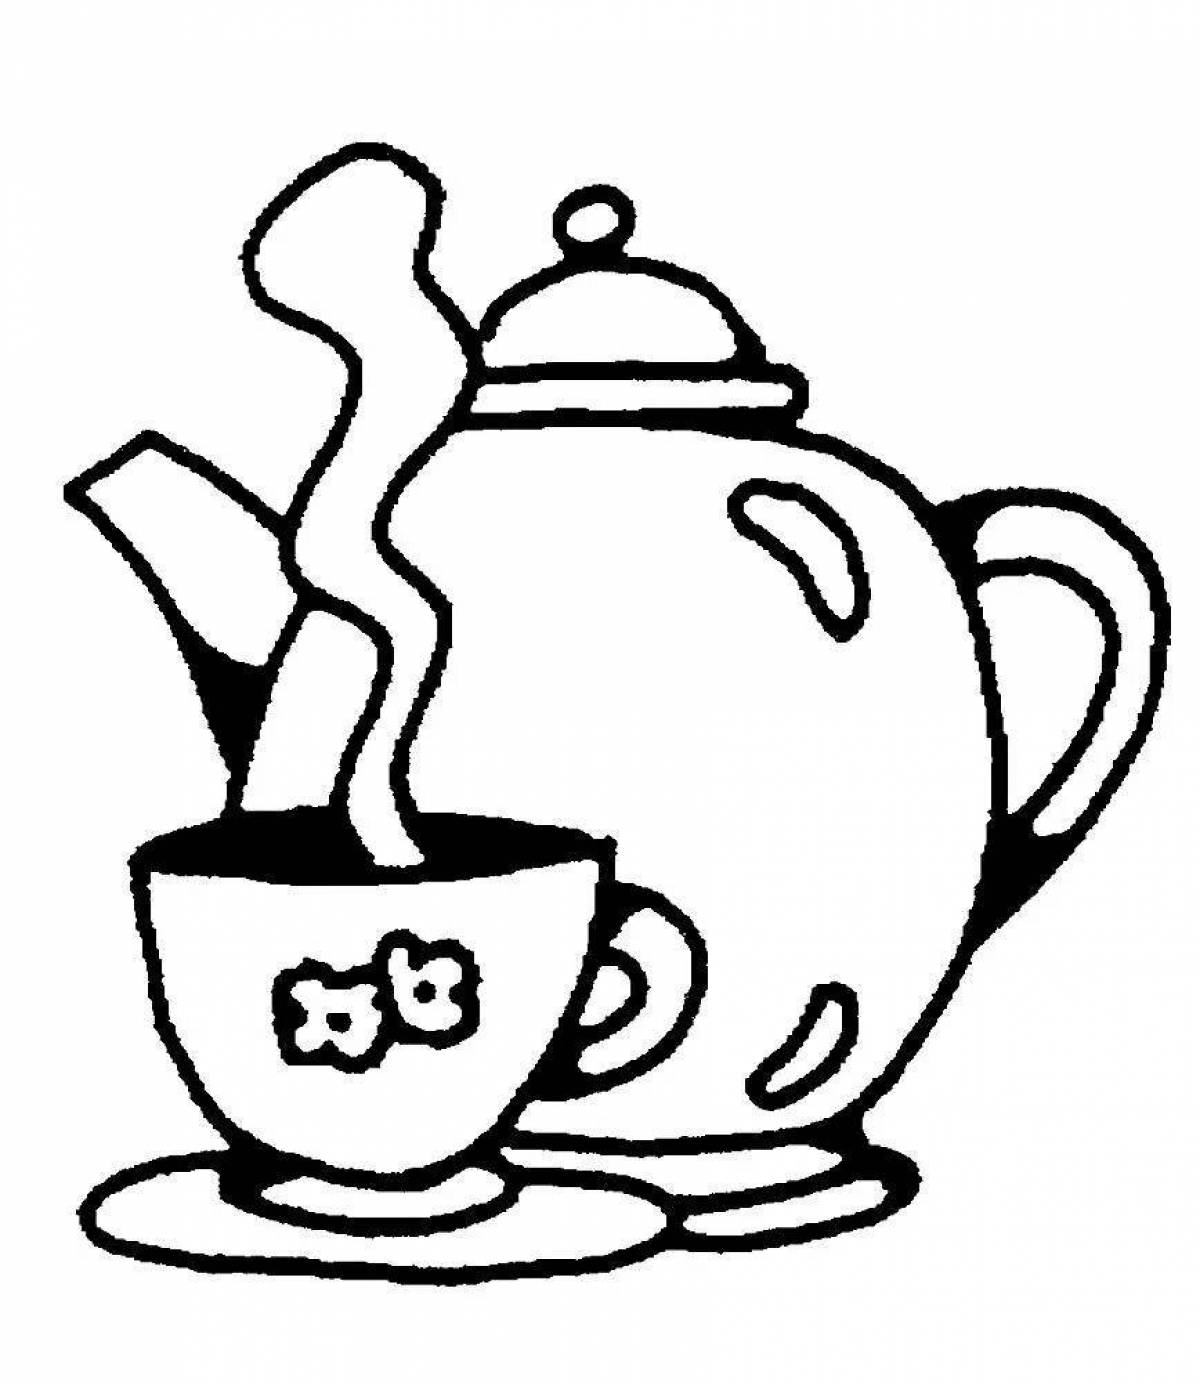 Coloring page hypnotic teapot and cup